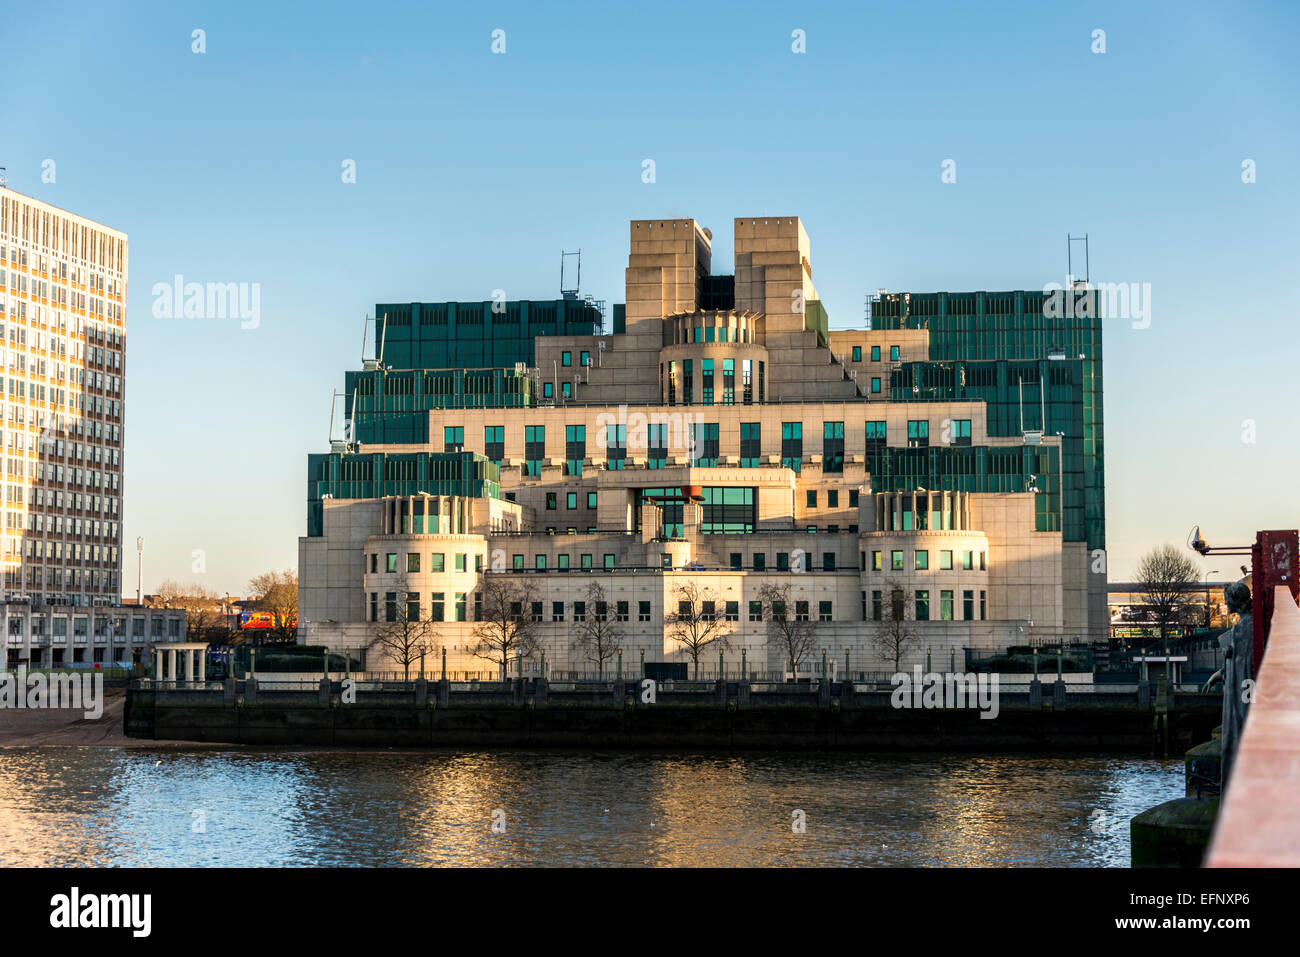 The headquarters of the British Secret Intelligence Service (SIS or MI6), at Vauxhall Cross, is located at 85 Albert Embankment Stock Photo